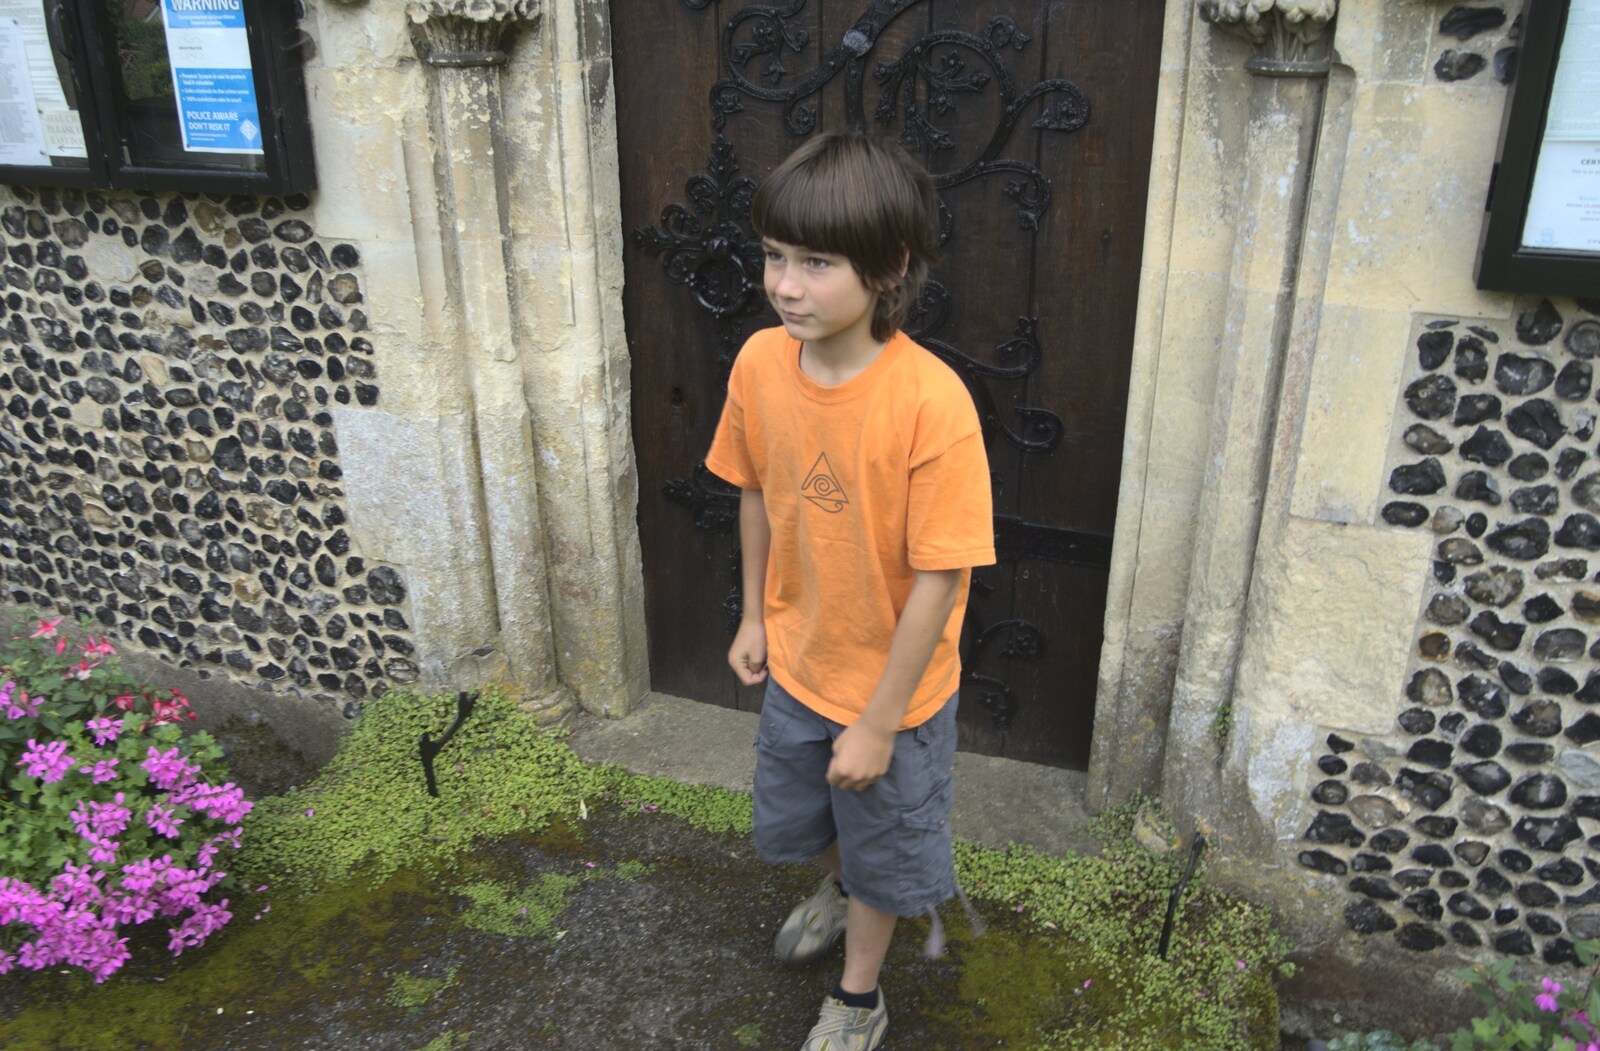 Kai outside the church from Phil and Lolly Visit, Brome, Suffolk - 2nd September 2009